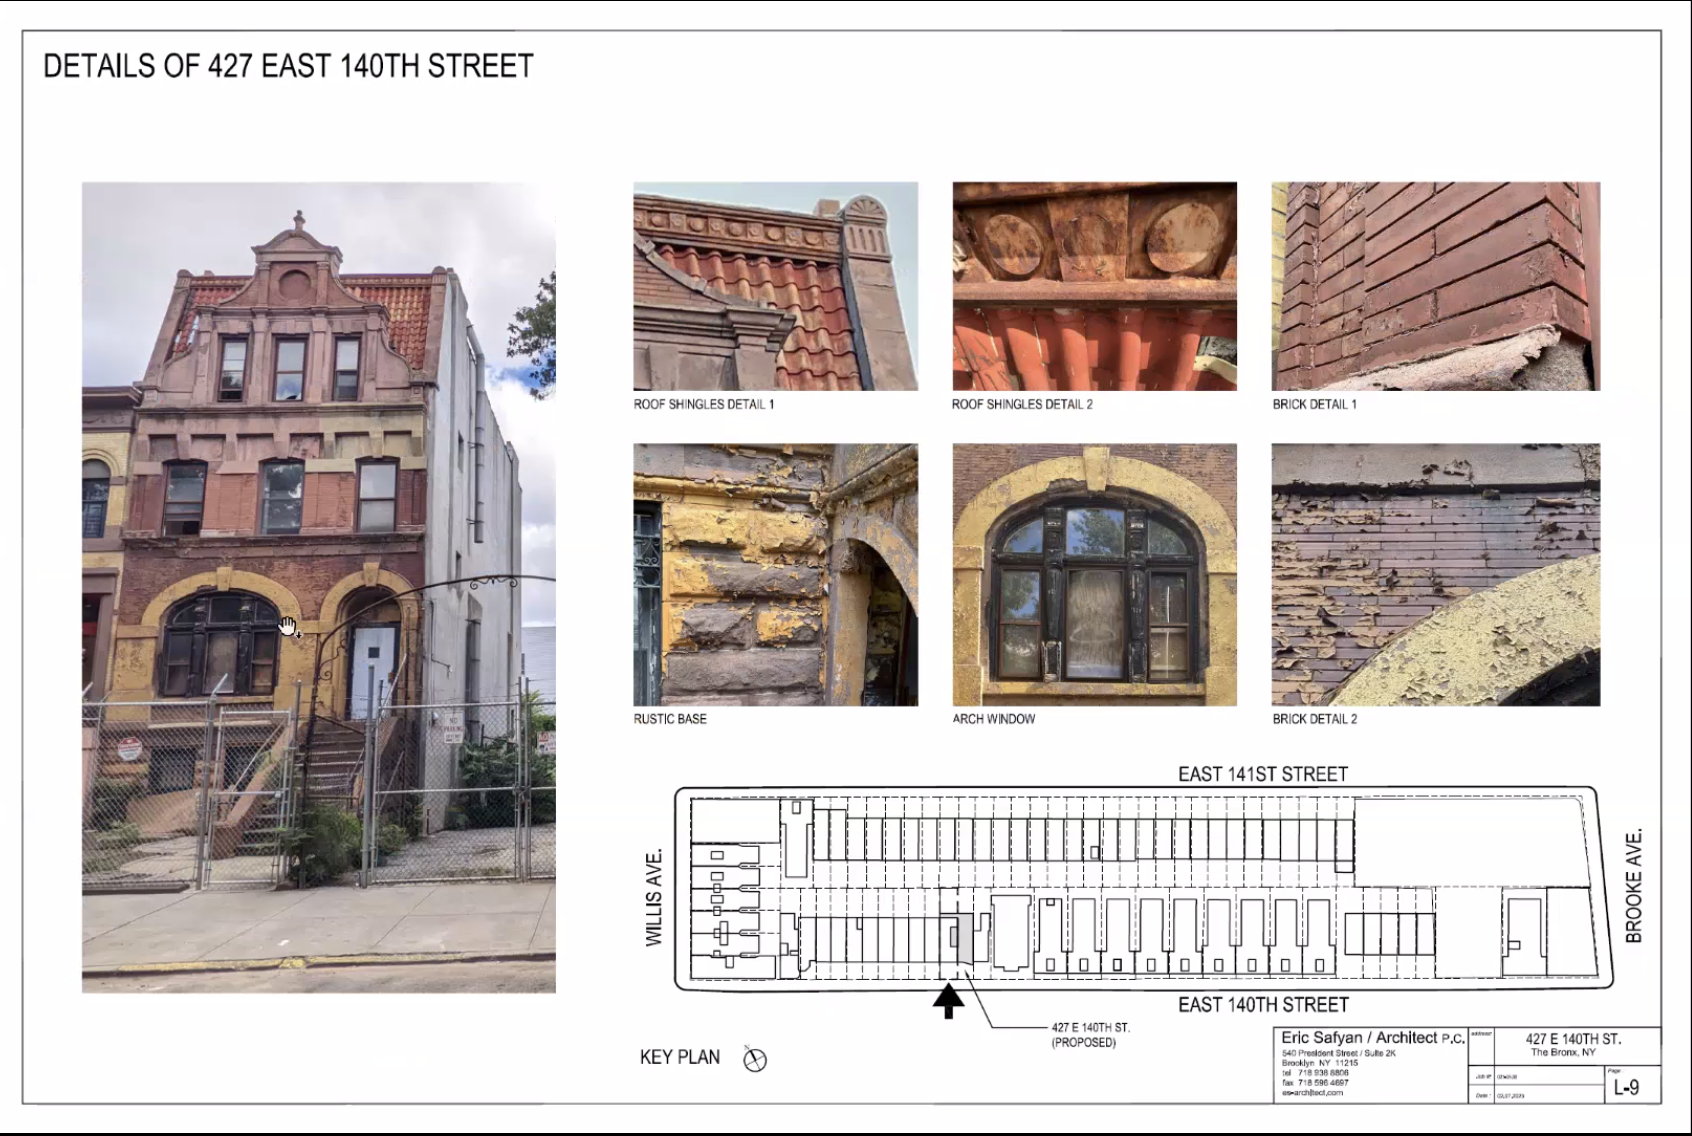 A presentation slide displayed by Joshua Dardashtian shows details of the historic property at 427 East 140th Street. The building is four stories high, appears to be brick, and has a front staircase.